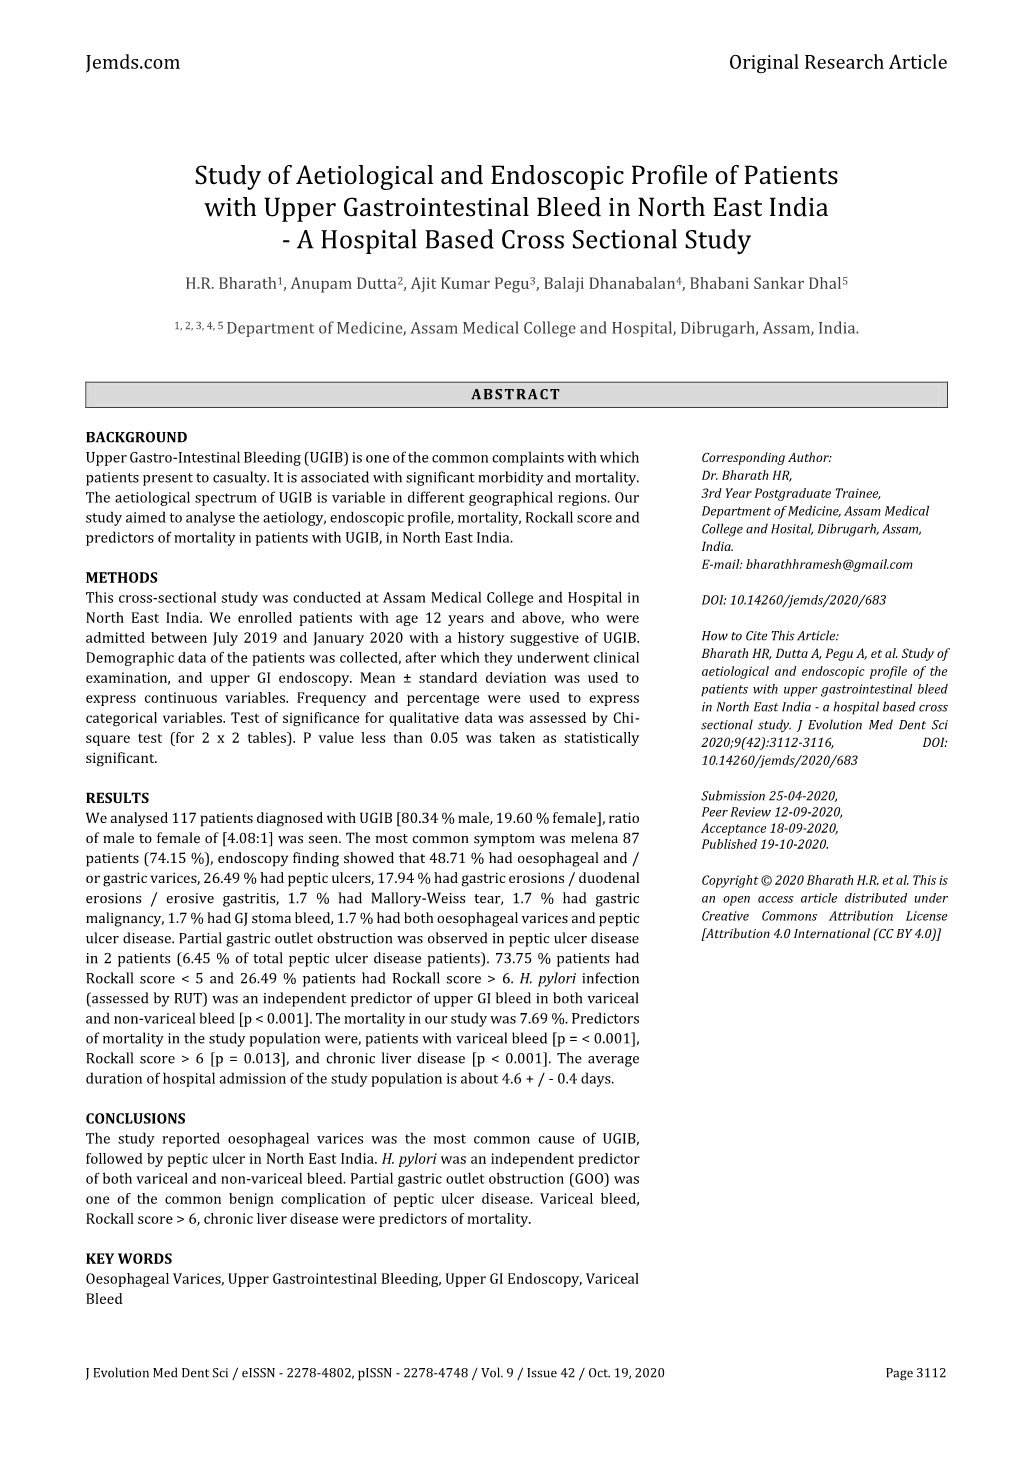 Study of Aetiological and Endoscopic Profile of Patients with Upper Gastrointestinal Bleed in North East India - a Hospital Based Cross Sectional Study